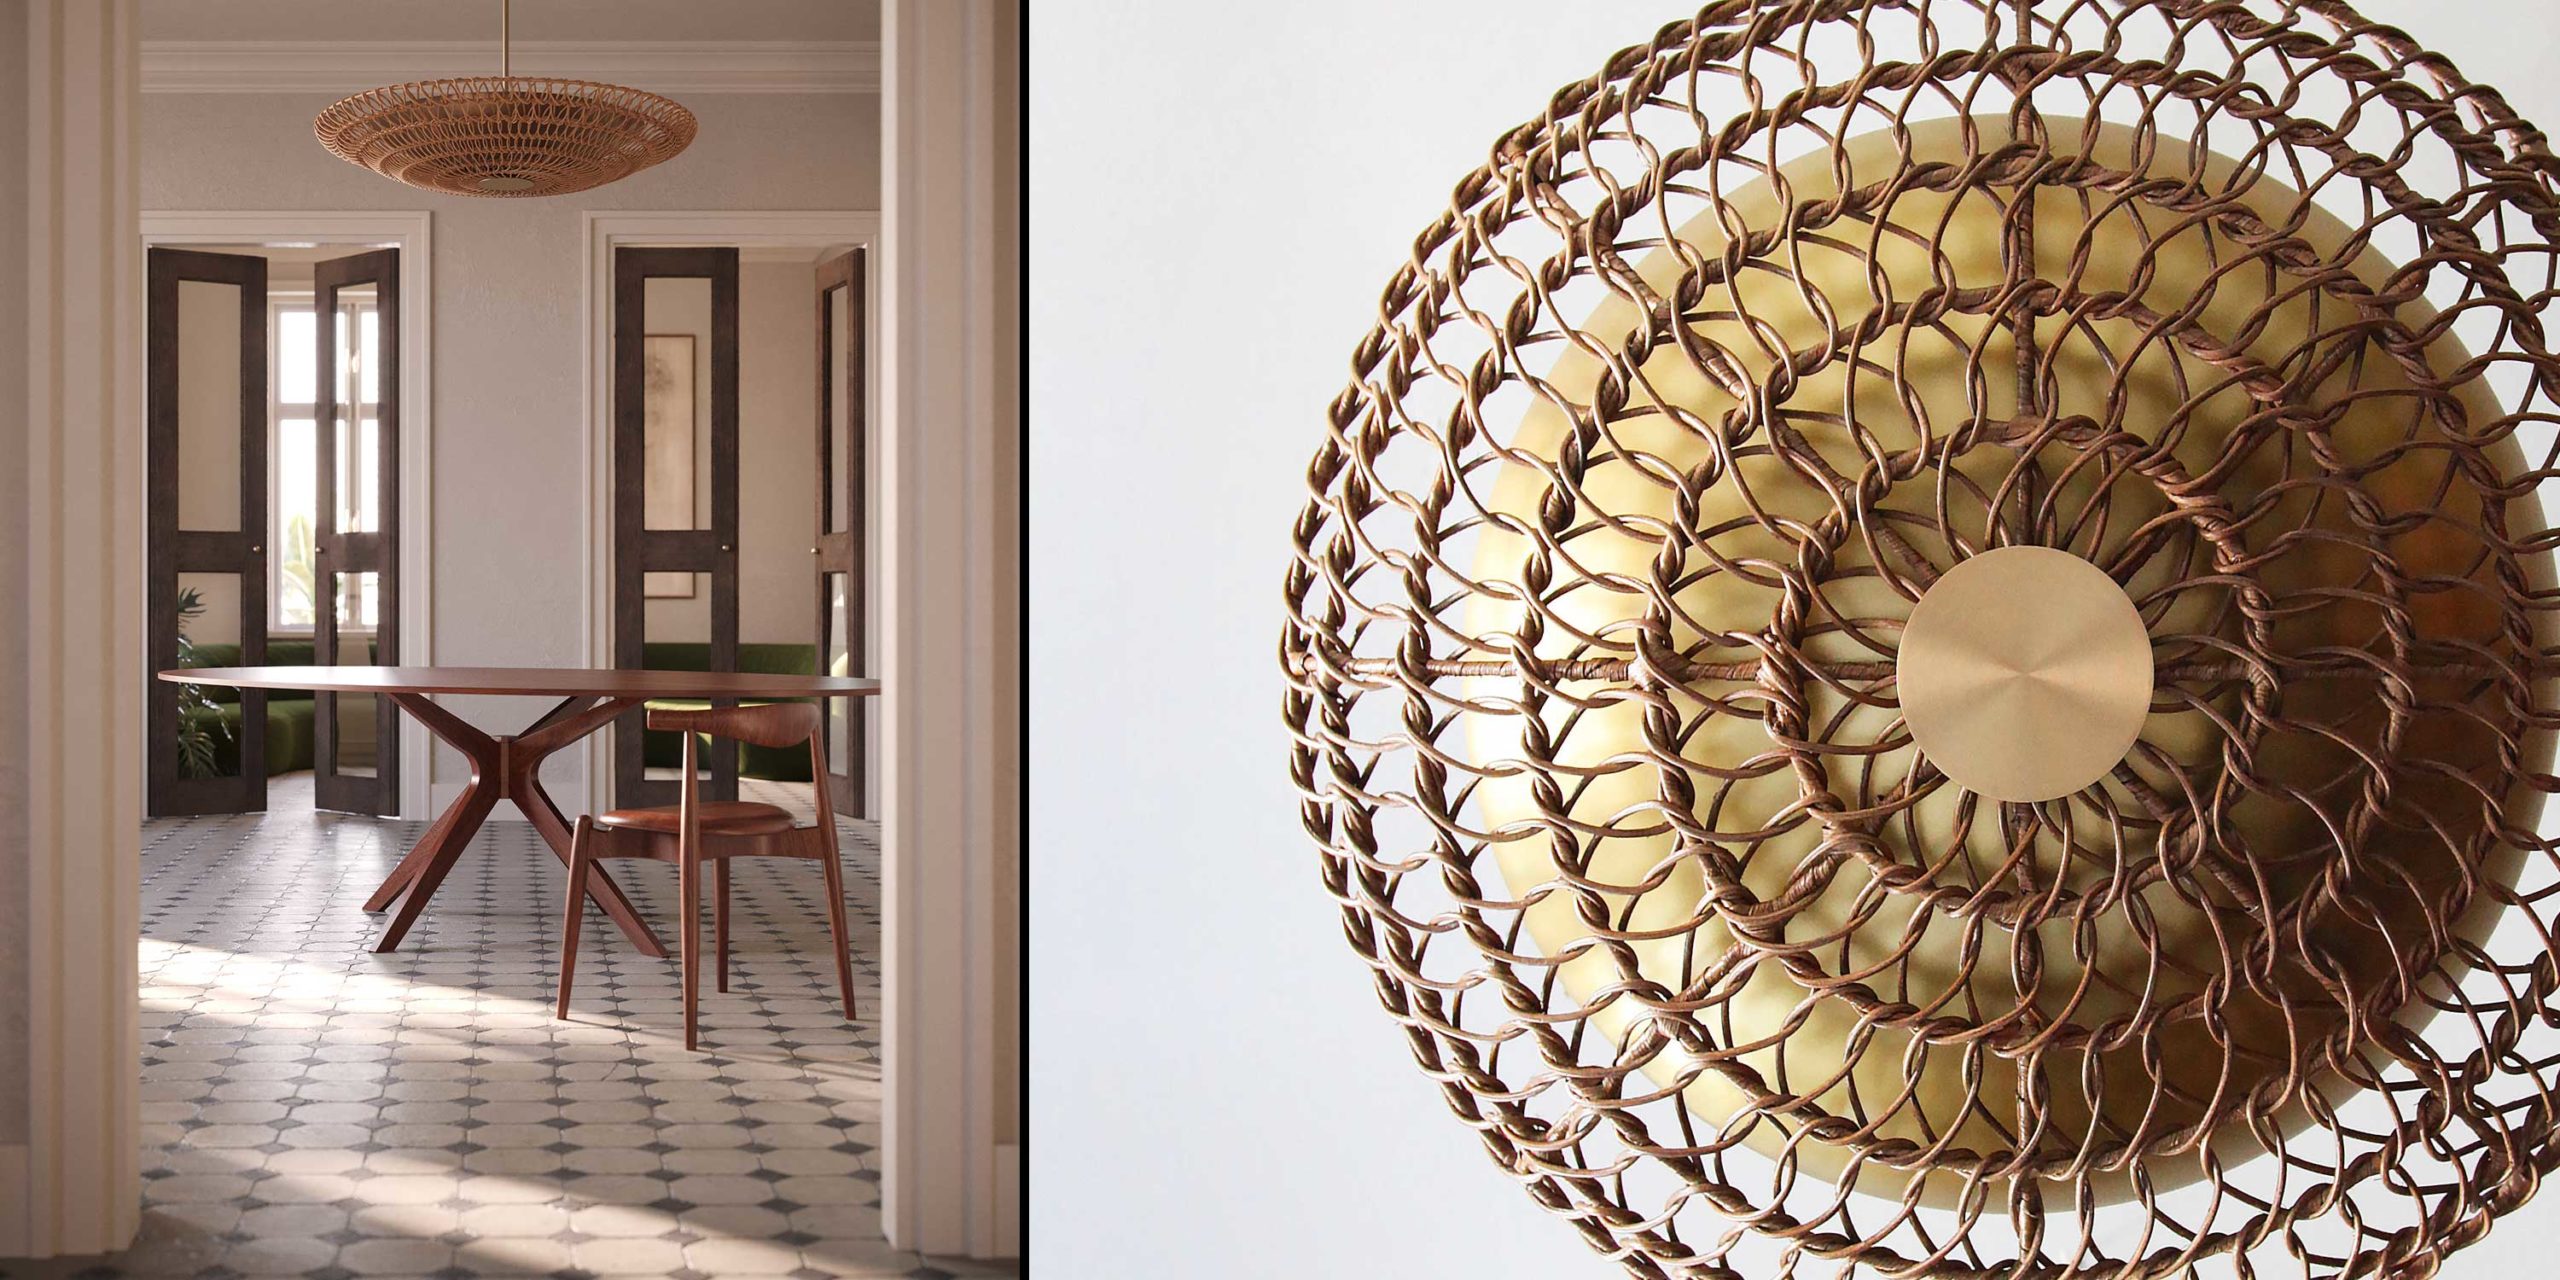 large scale rattan lighting with brass hardware the perfect statement pendant light